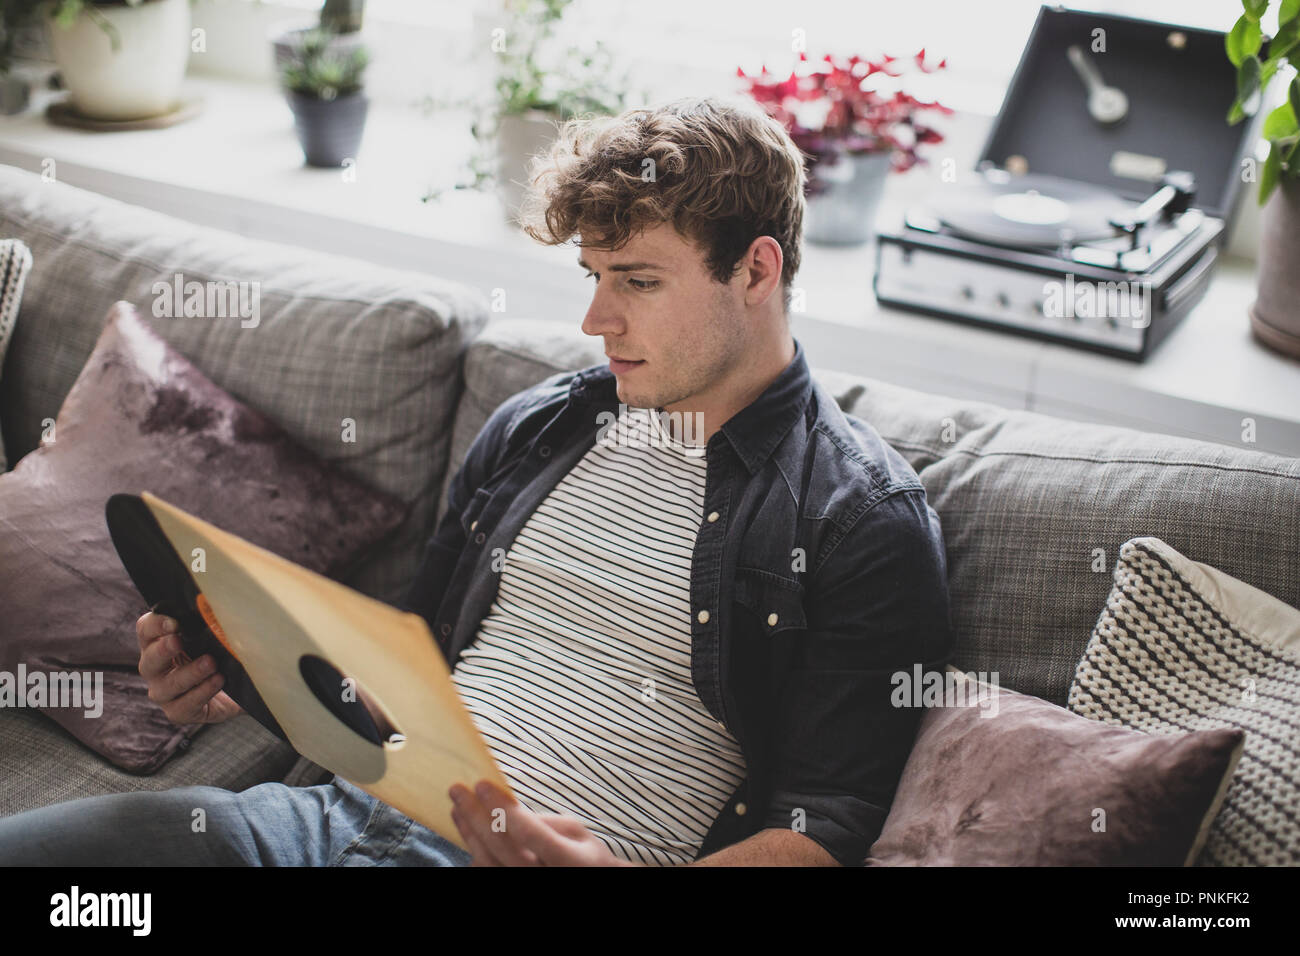 Young adult male looking at vinyl record Stock Photo